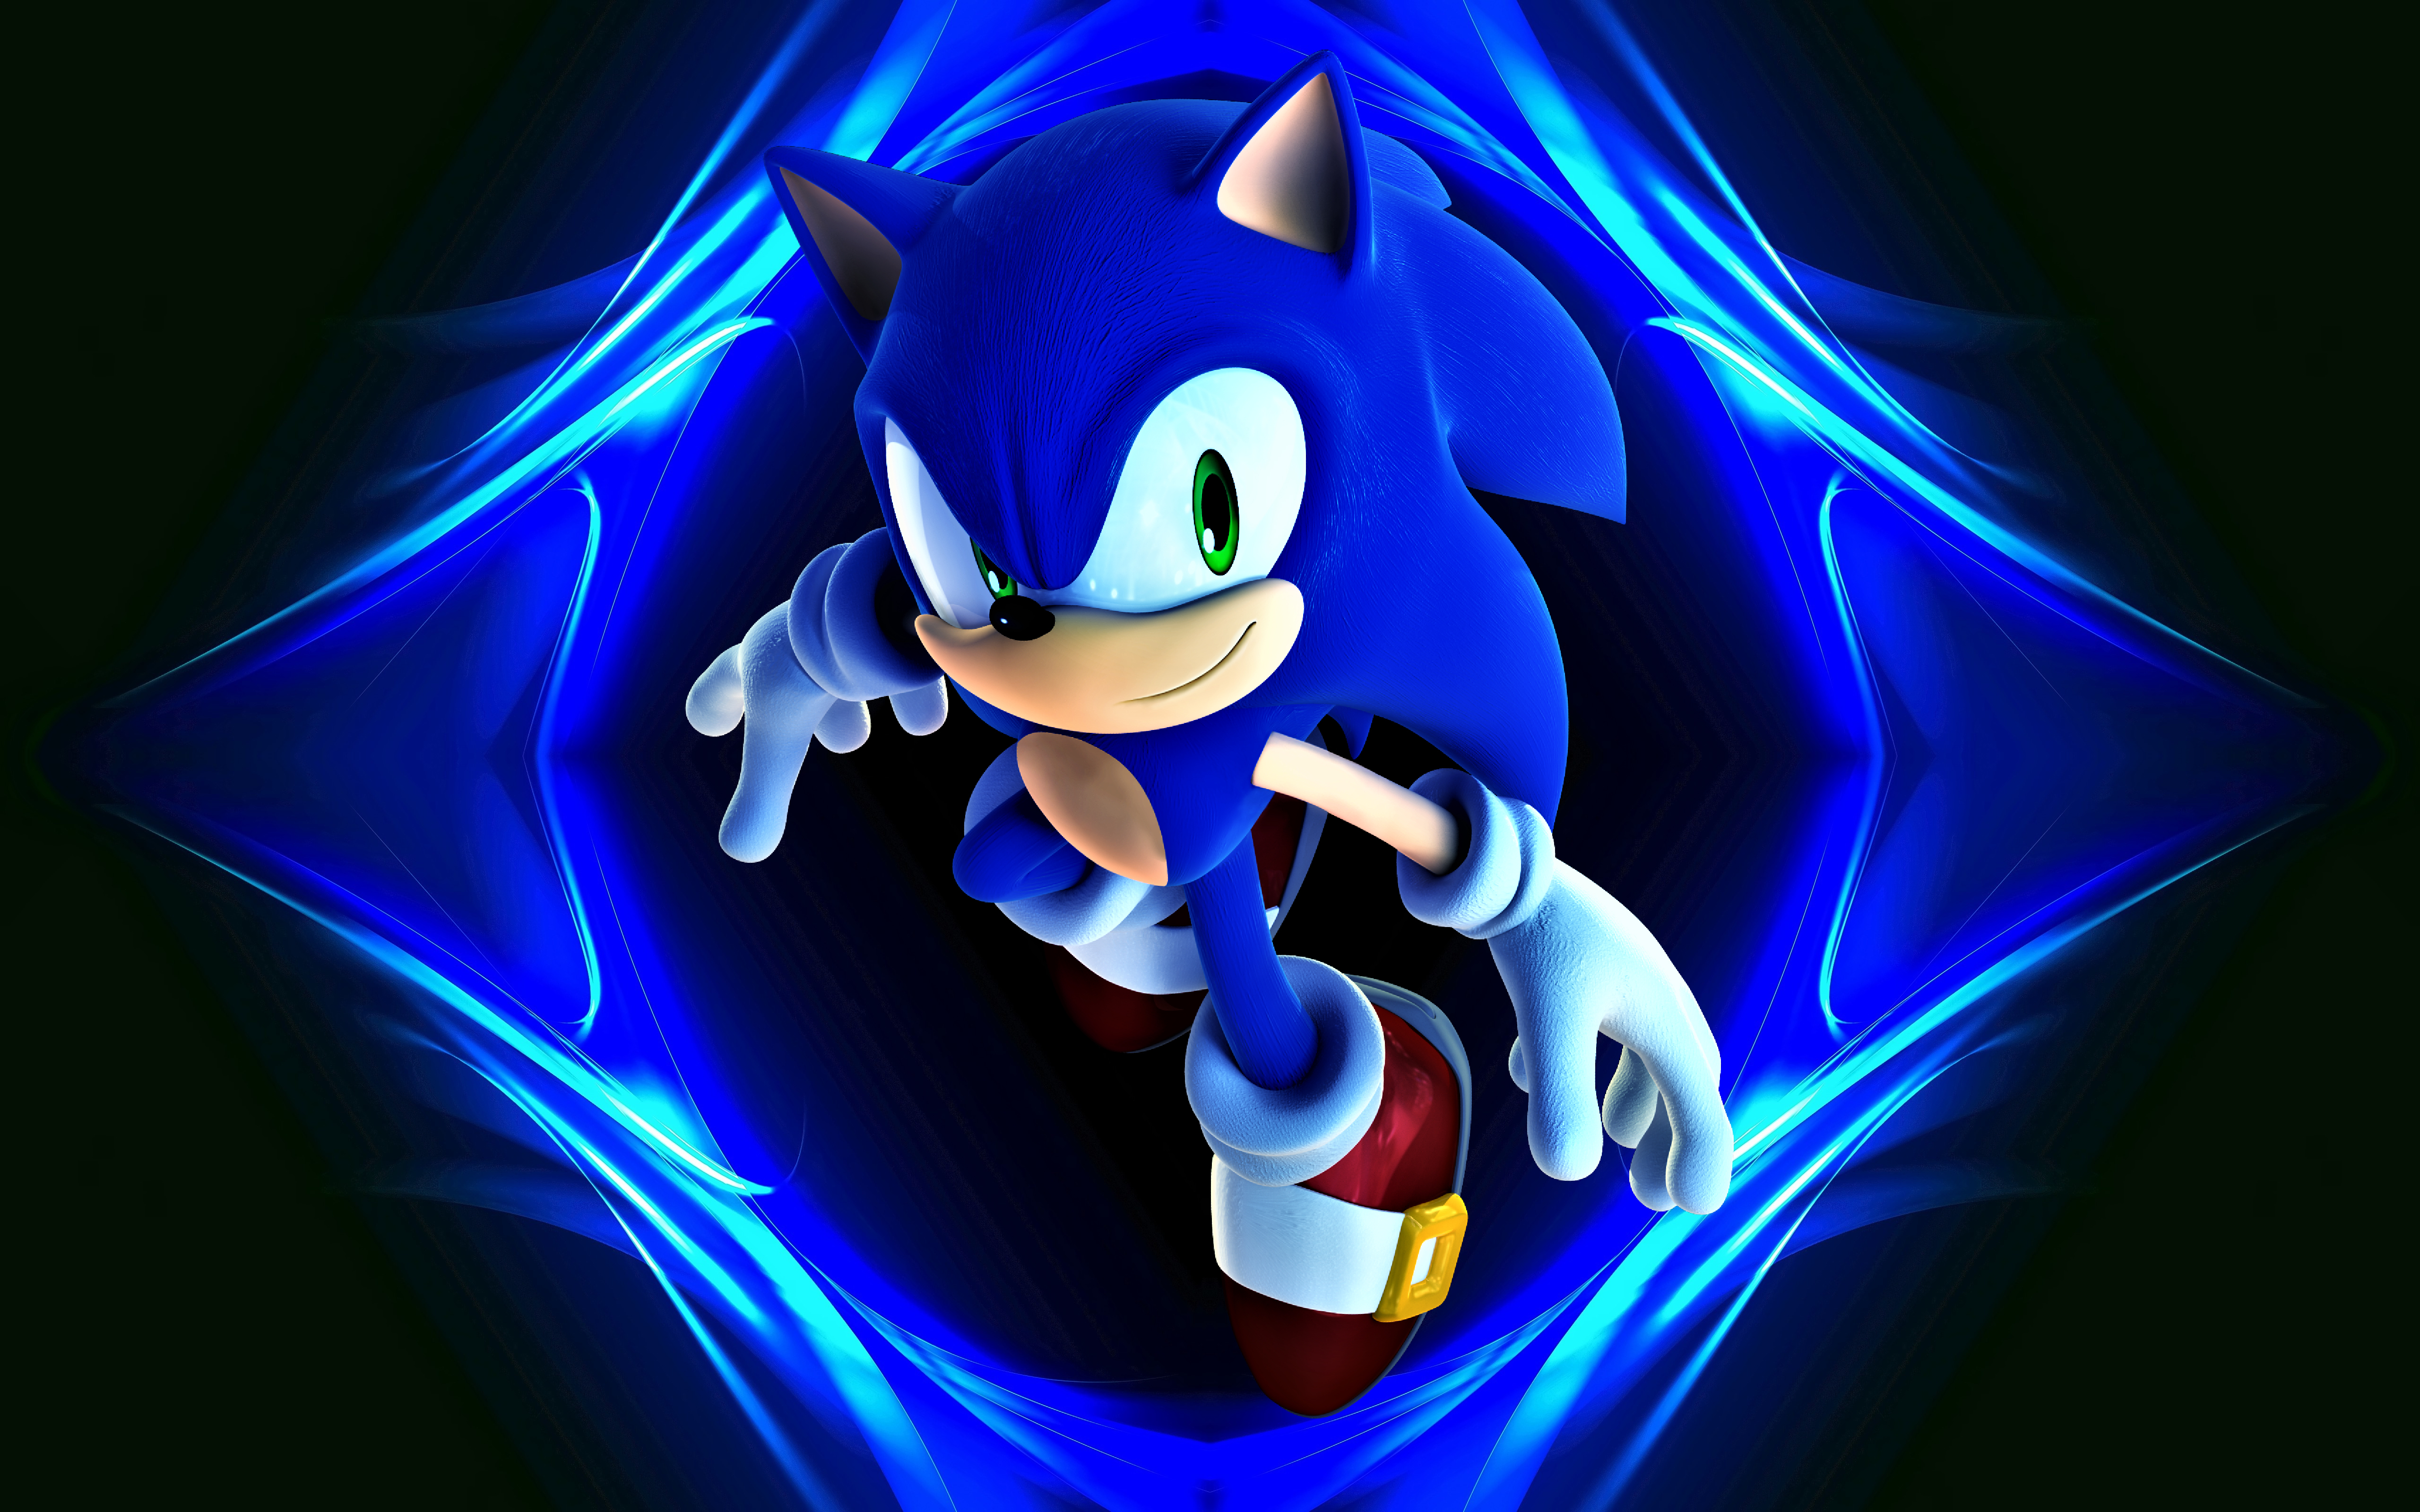 4k sonic the hedgehog 2020 iPhone X Wallpapers Free Download